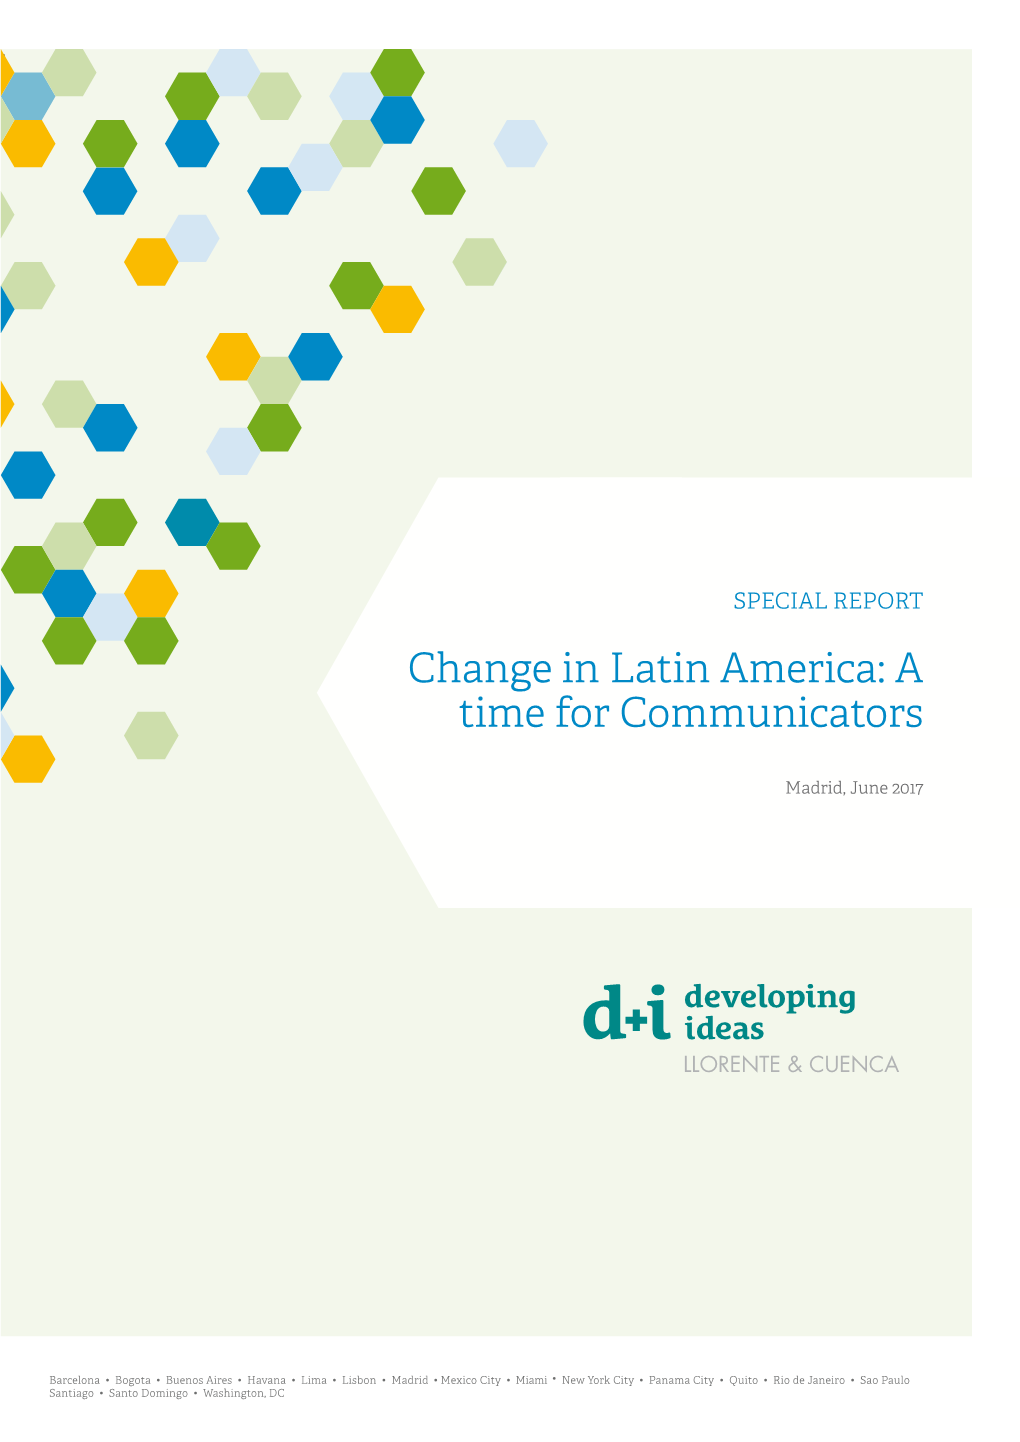 Change in Latin America: a Time for Communicators